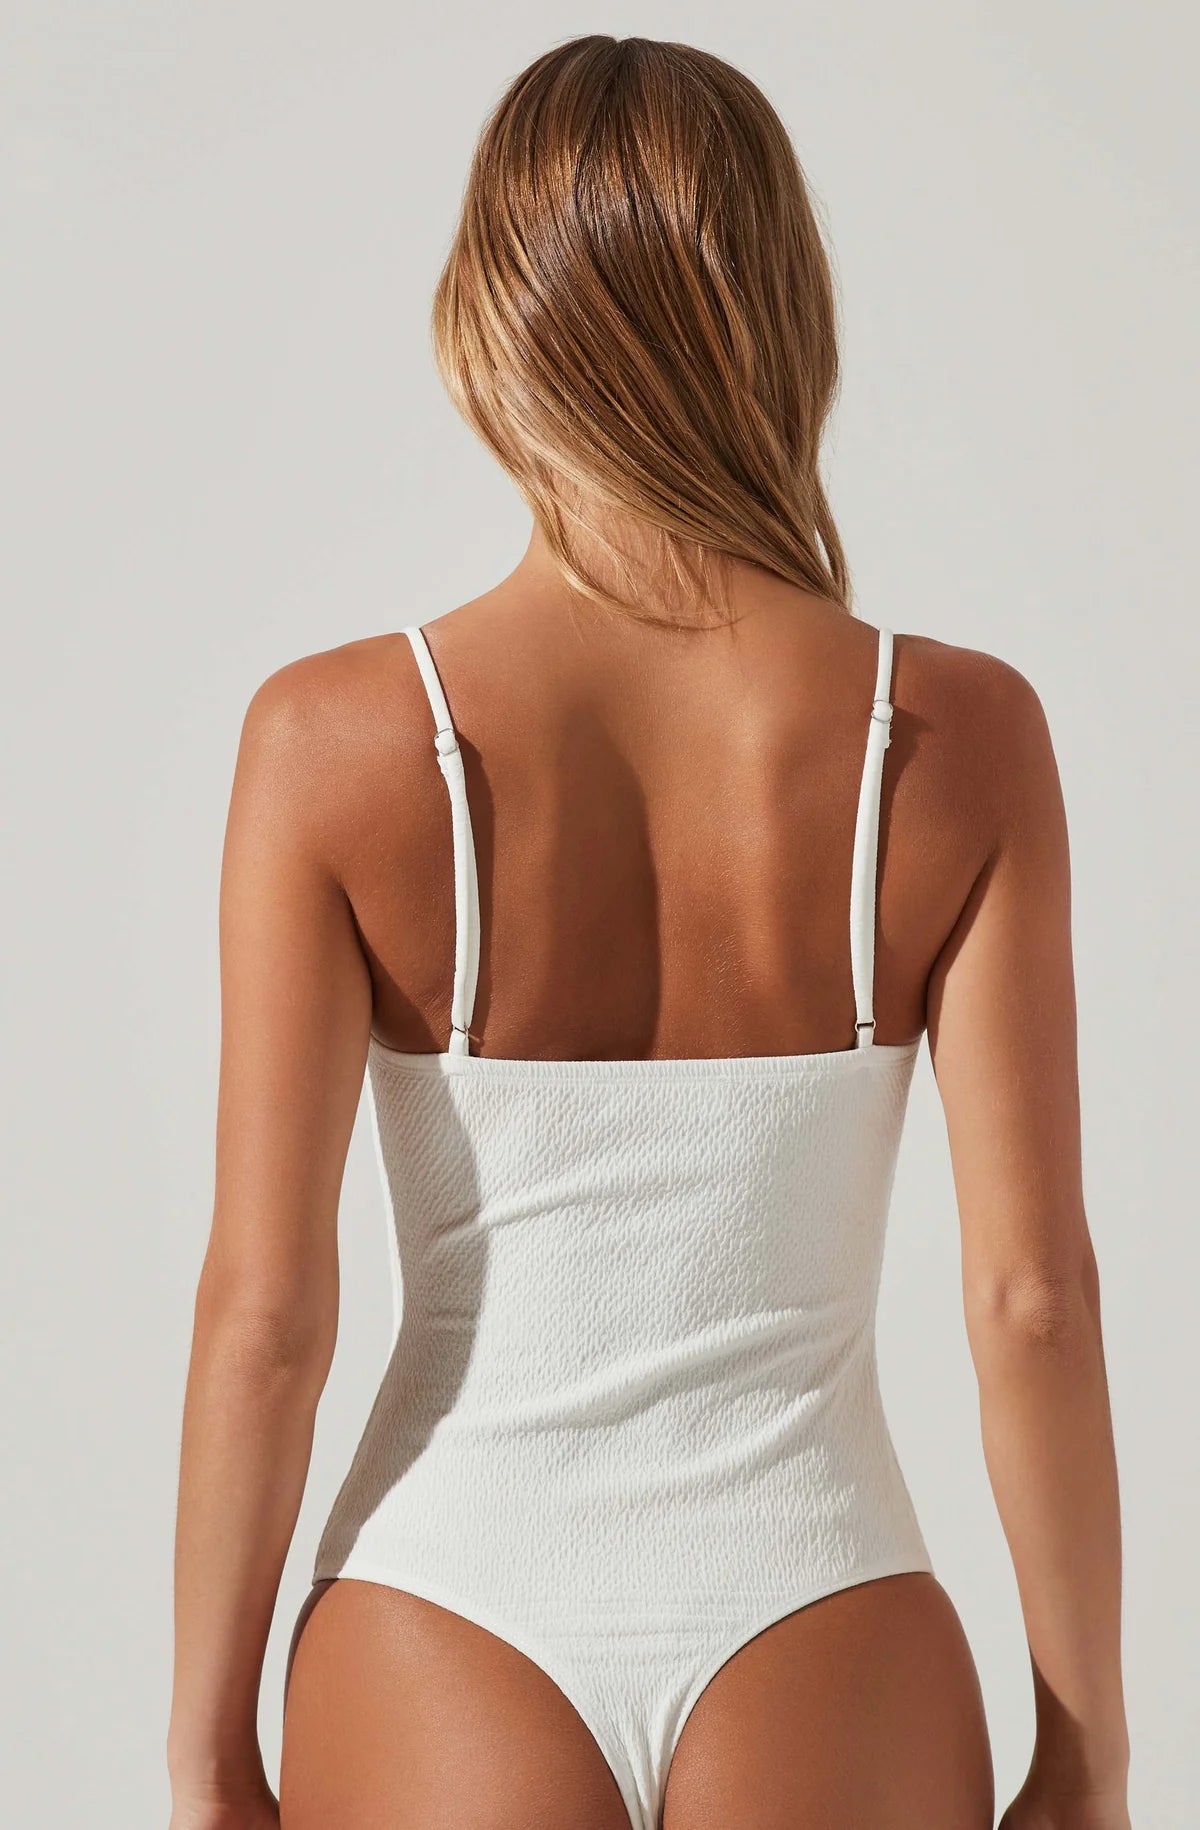 Model wearing Fia Crinkled Plunge Bodysuit in White from ASTR The Label available at UniKoncept in Waterloo back view